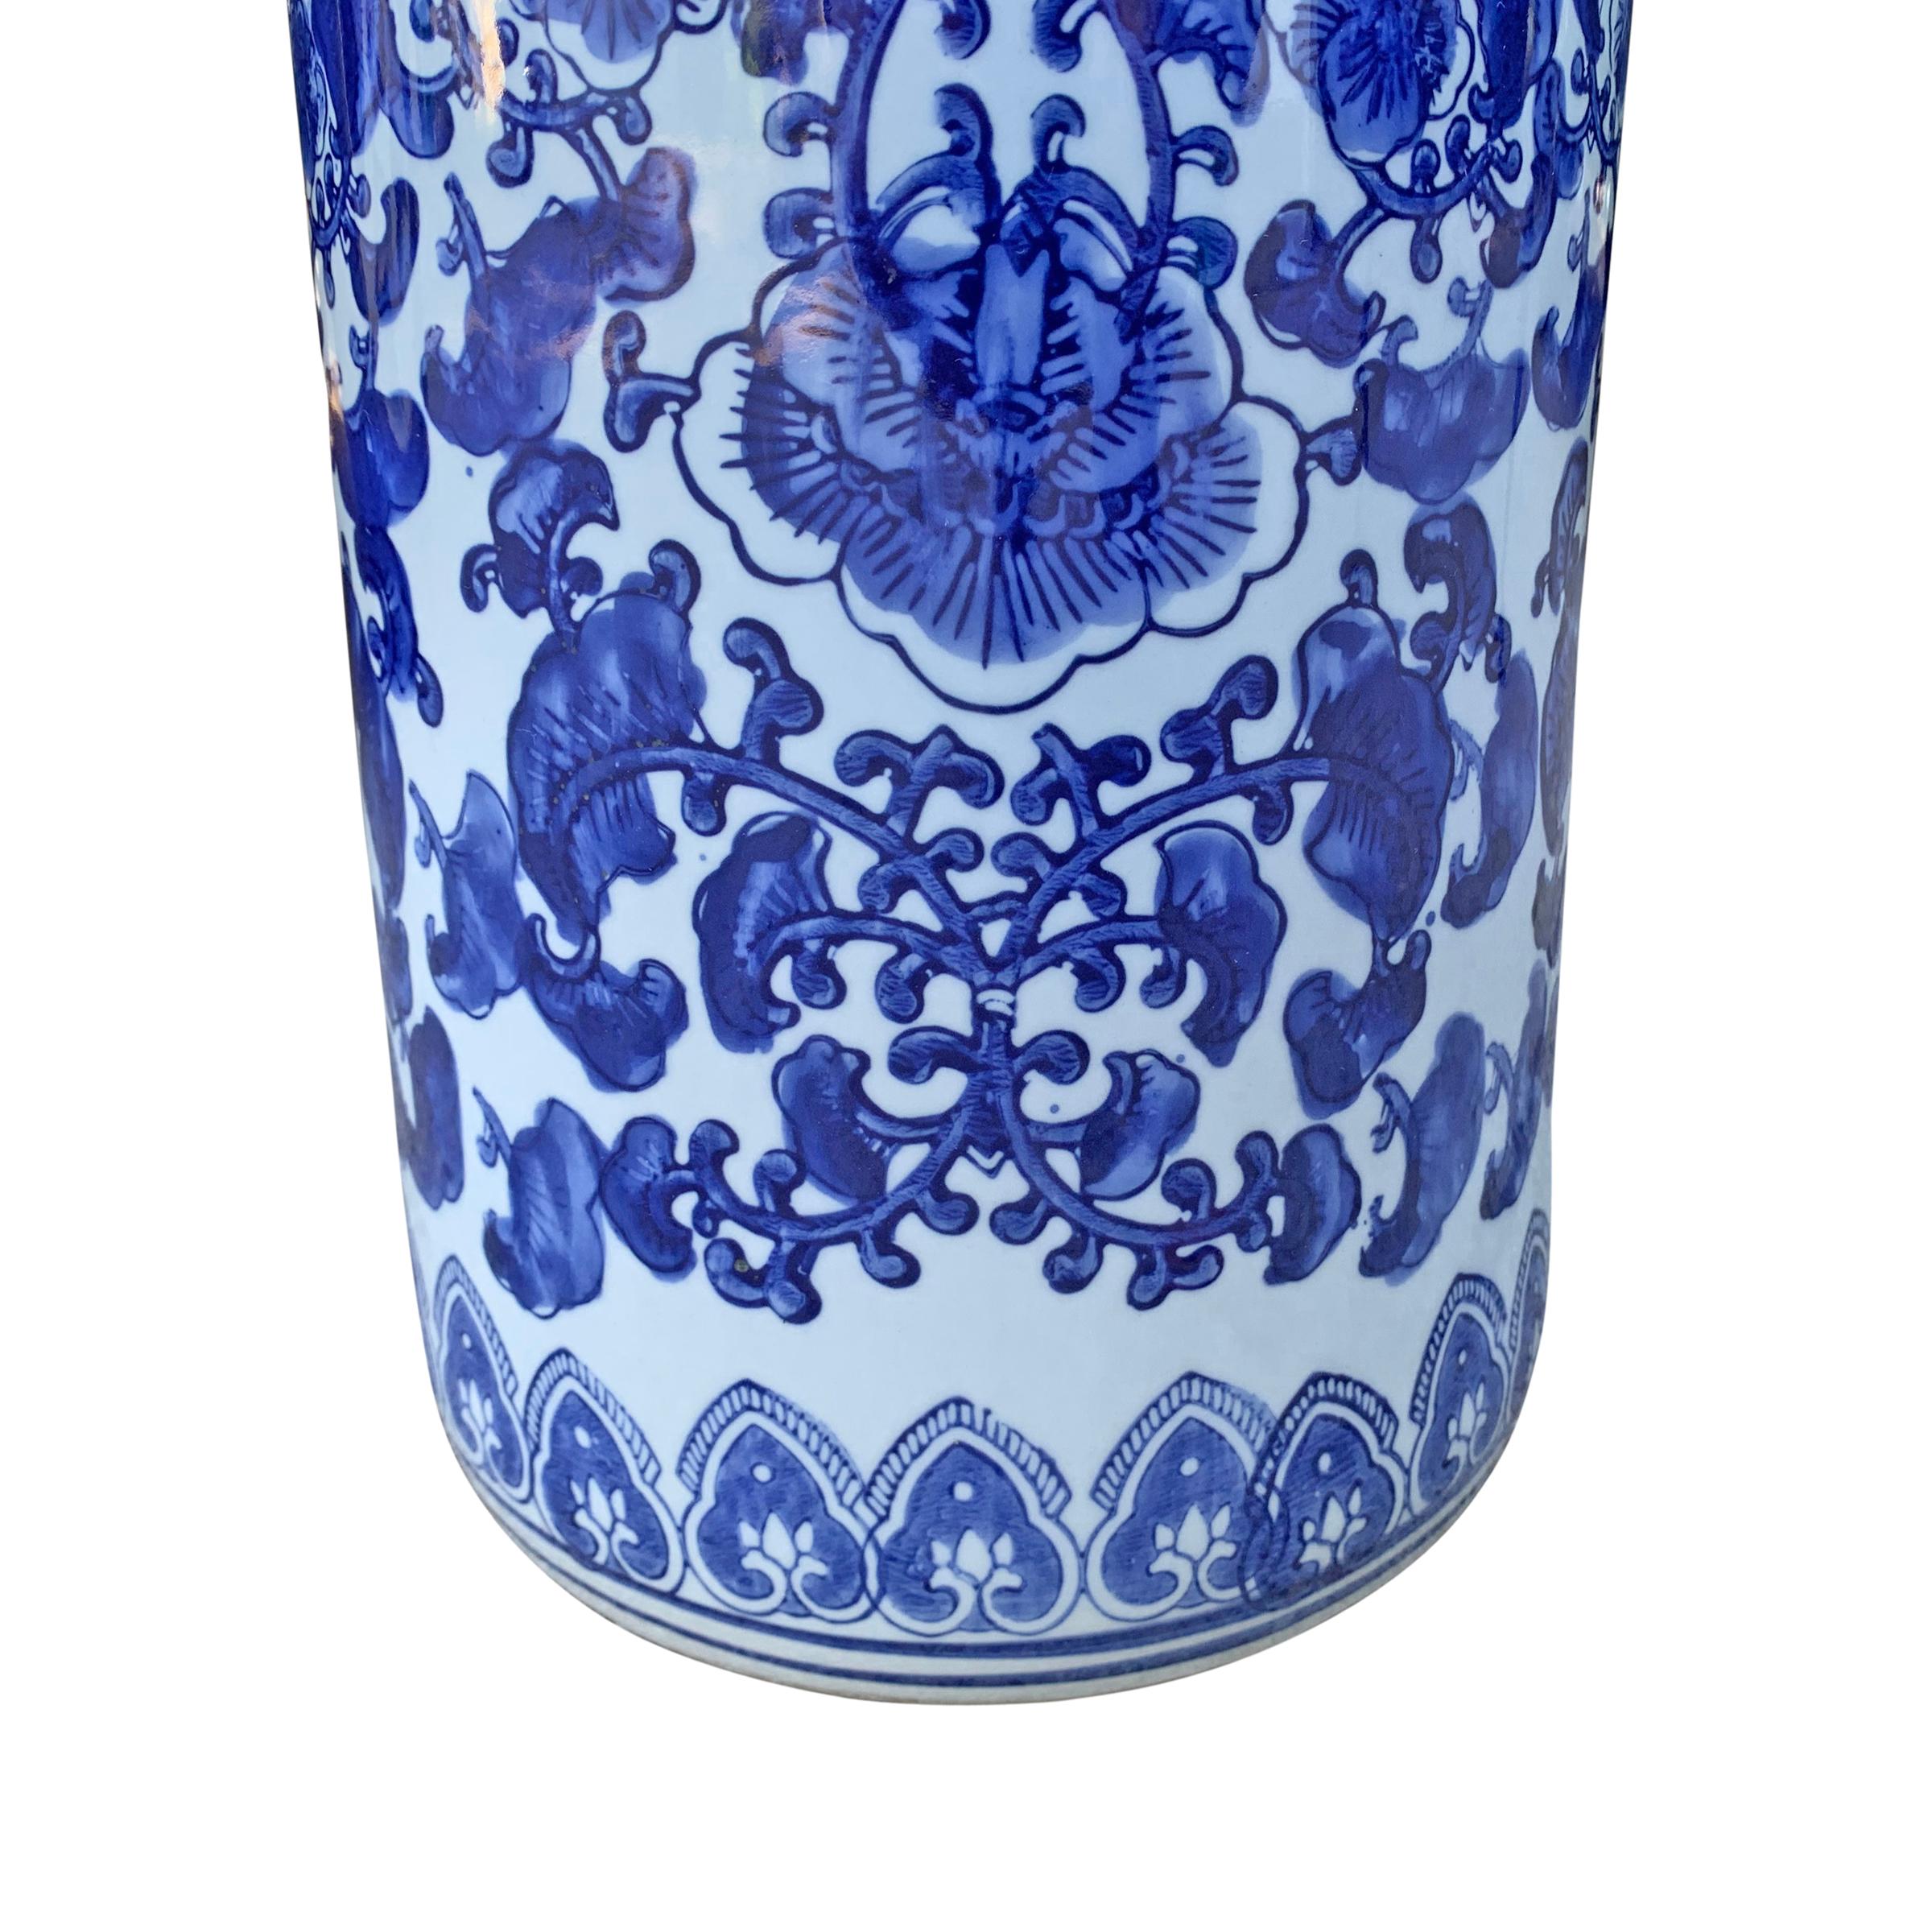 Porcelain Chinese Blue and White Vase or Umbrella Stand